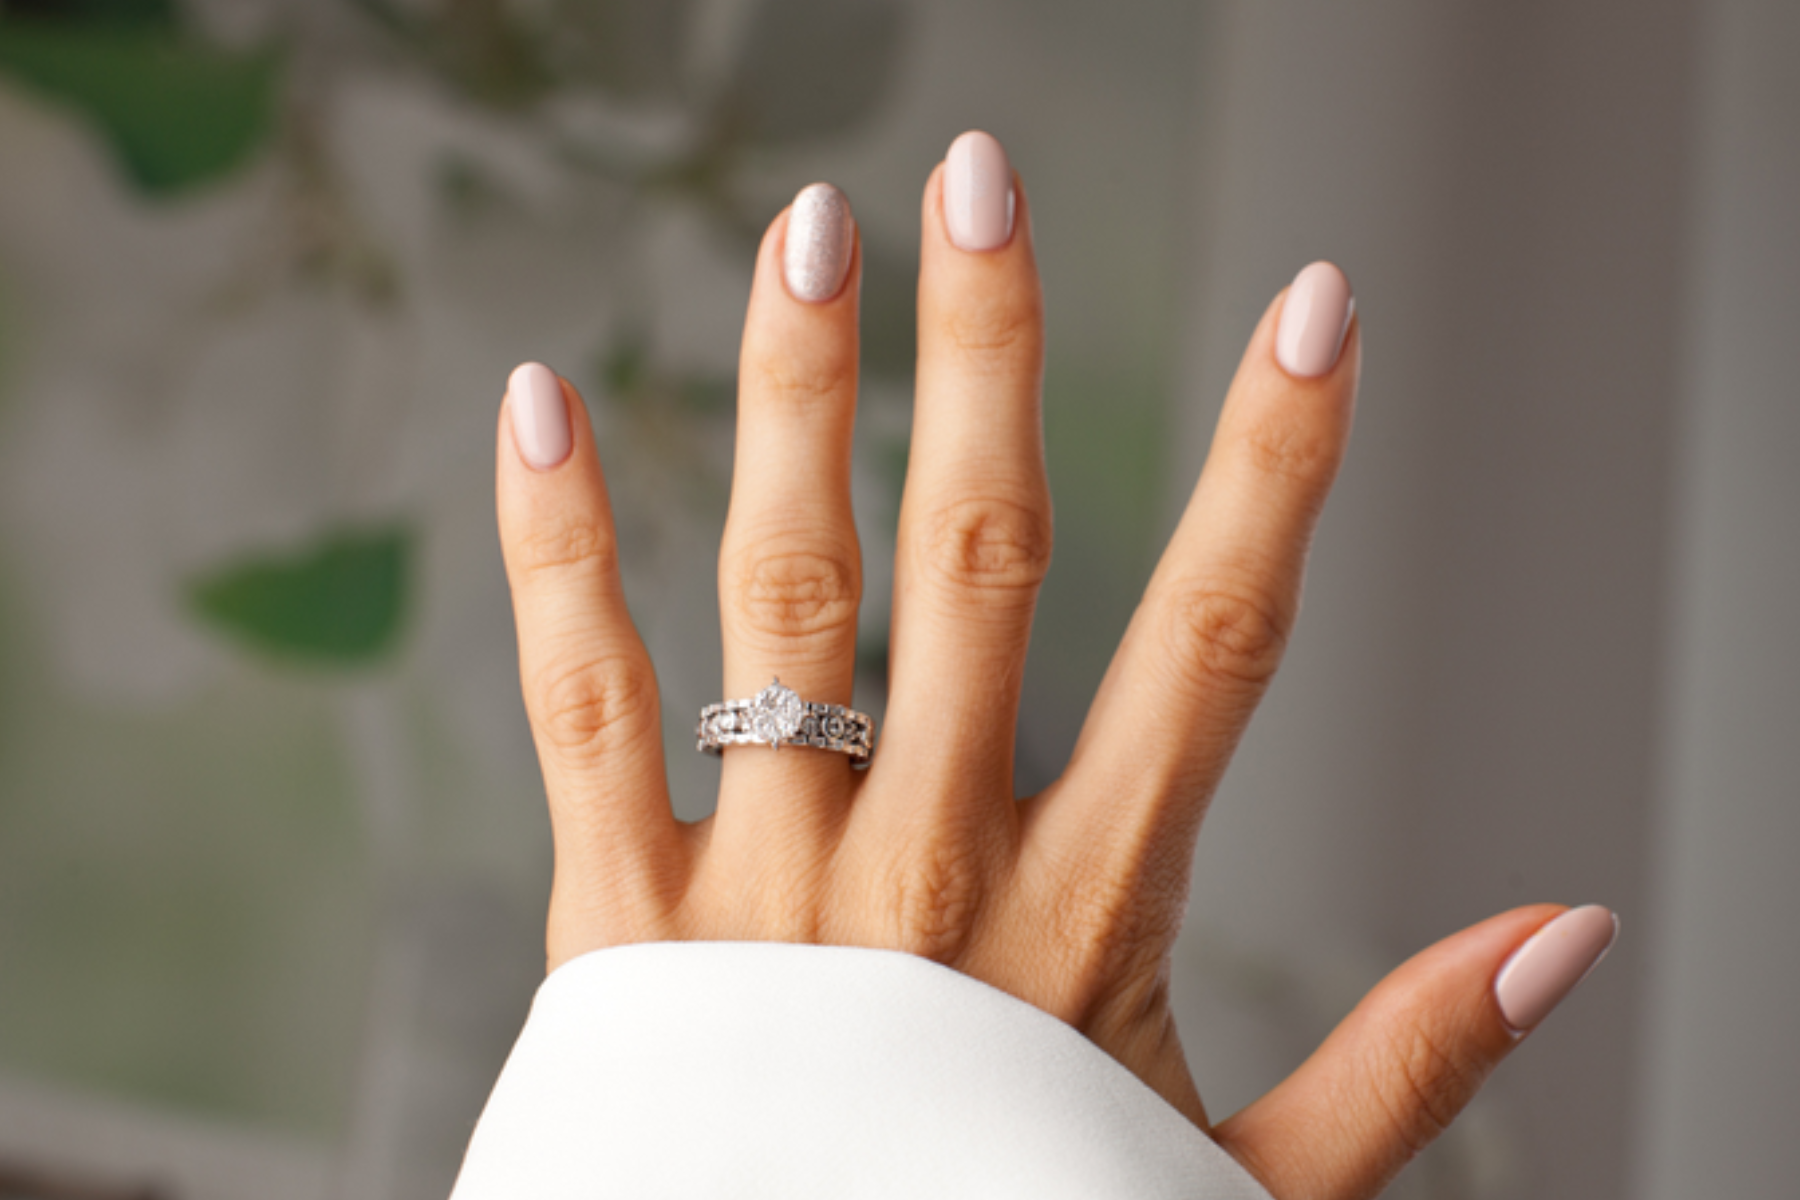 A woman's hand is decked with a conventional wedding ring